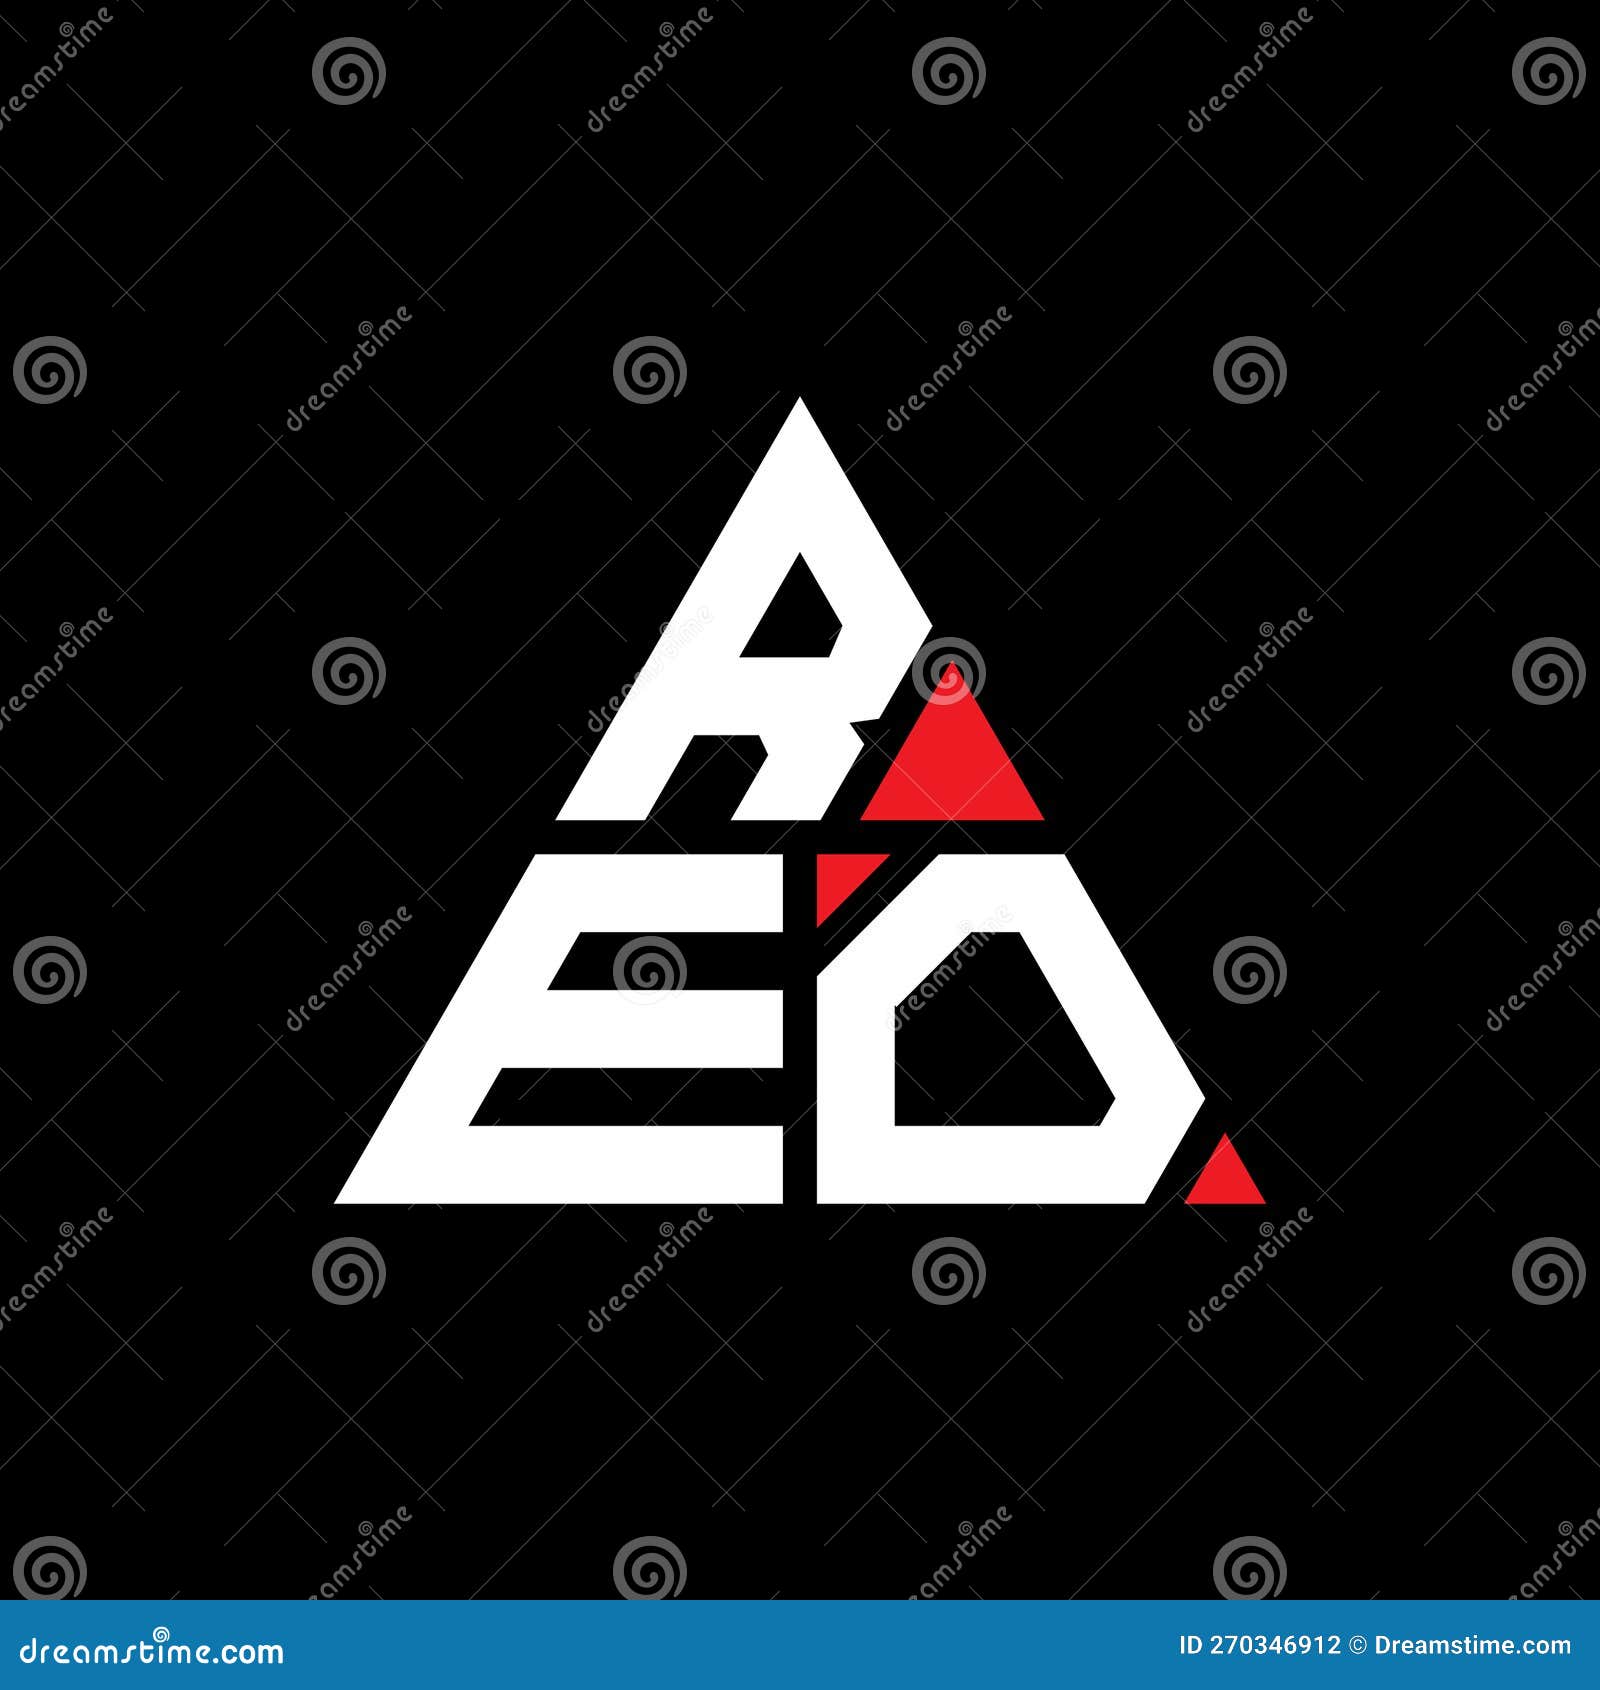 reo triangle letter logo  with triangle . reo triangle logo  monogram. reo triangle  logo template with red